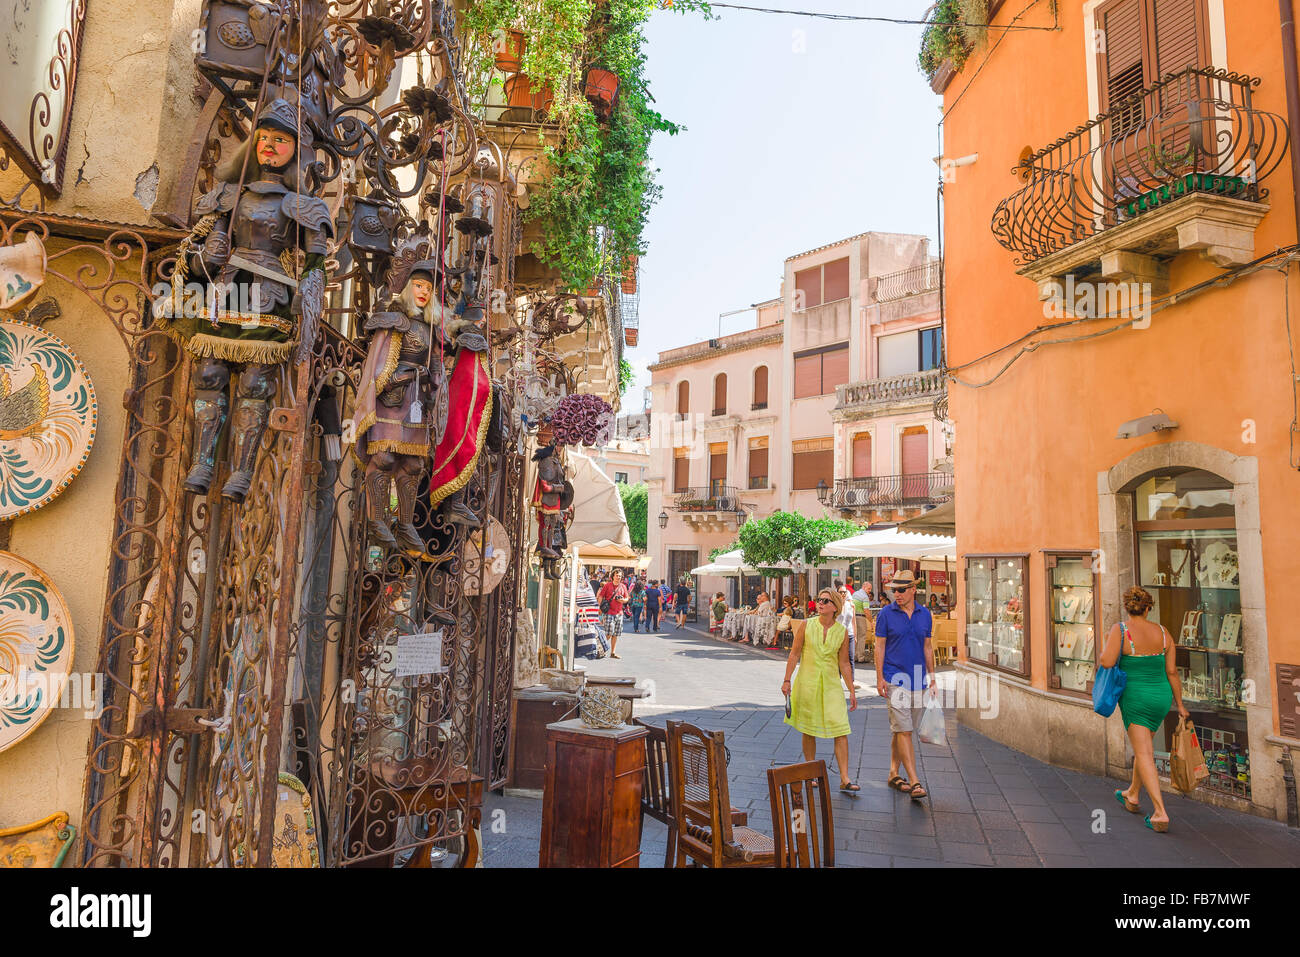 Taormina shopping Sicily, view of a middle-aged tourist couple looking at an elaborate display outside an antiques shop in the Corso Umberto I. Stock Photo